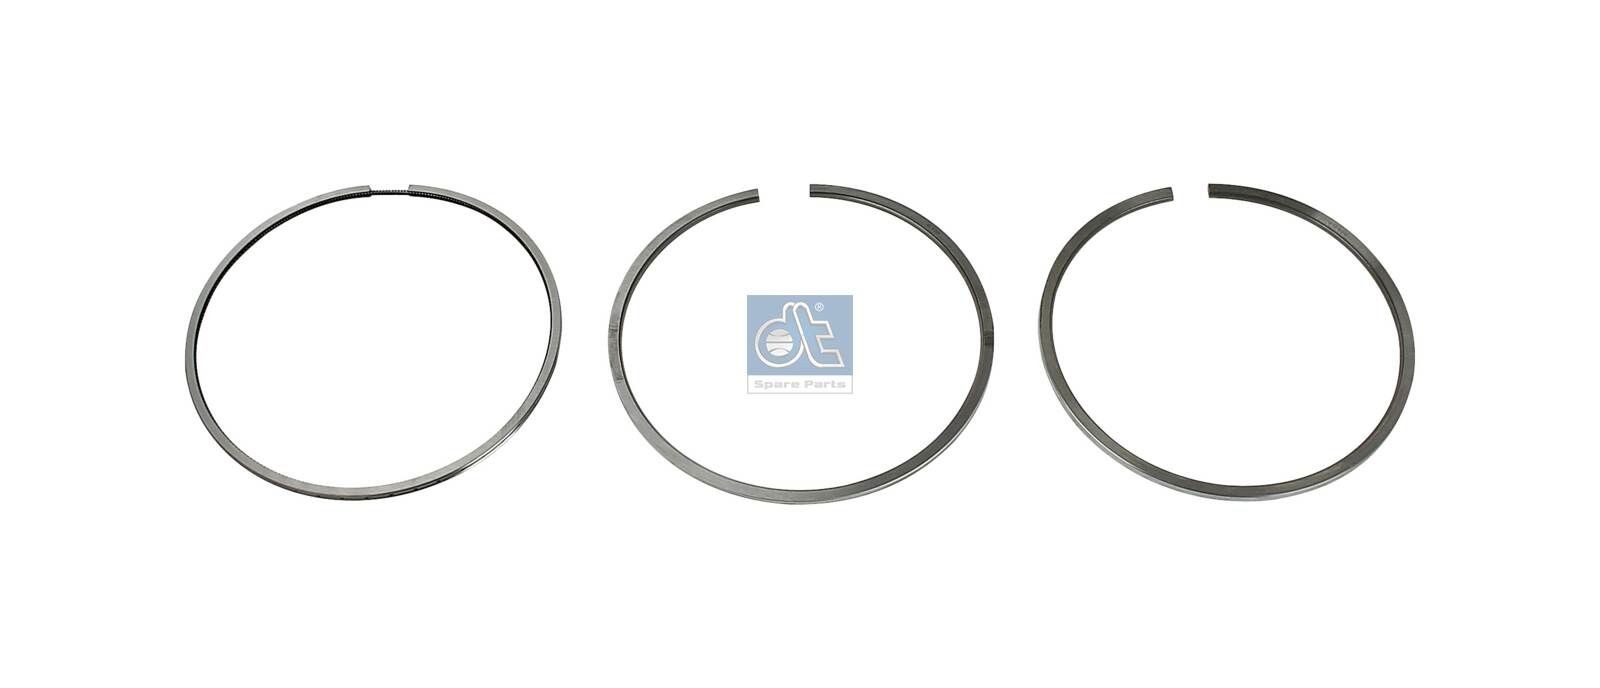 Piston ring kit DT Spare Parts 127mm - 1.33130